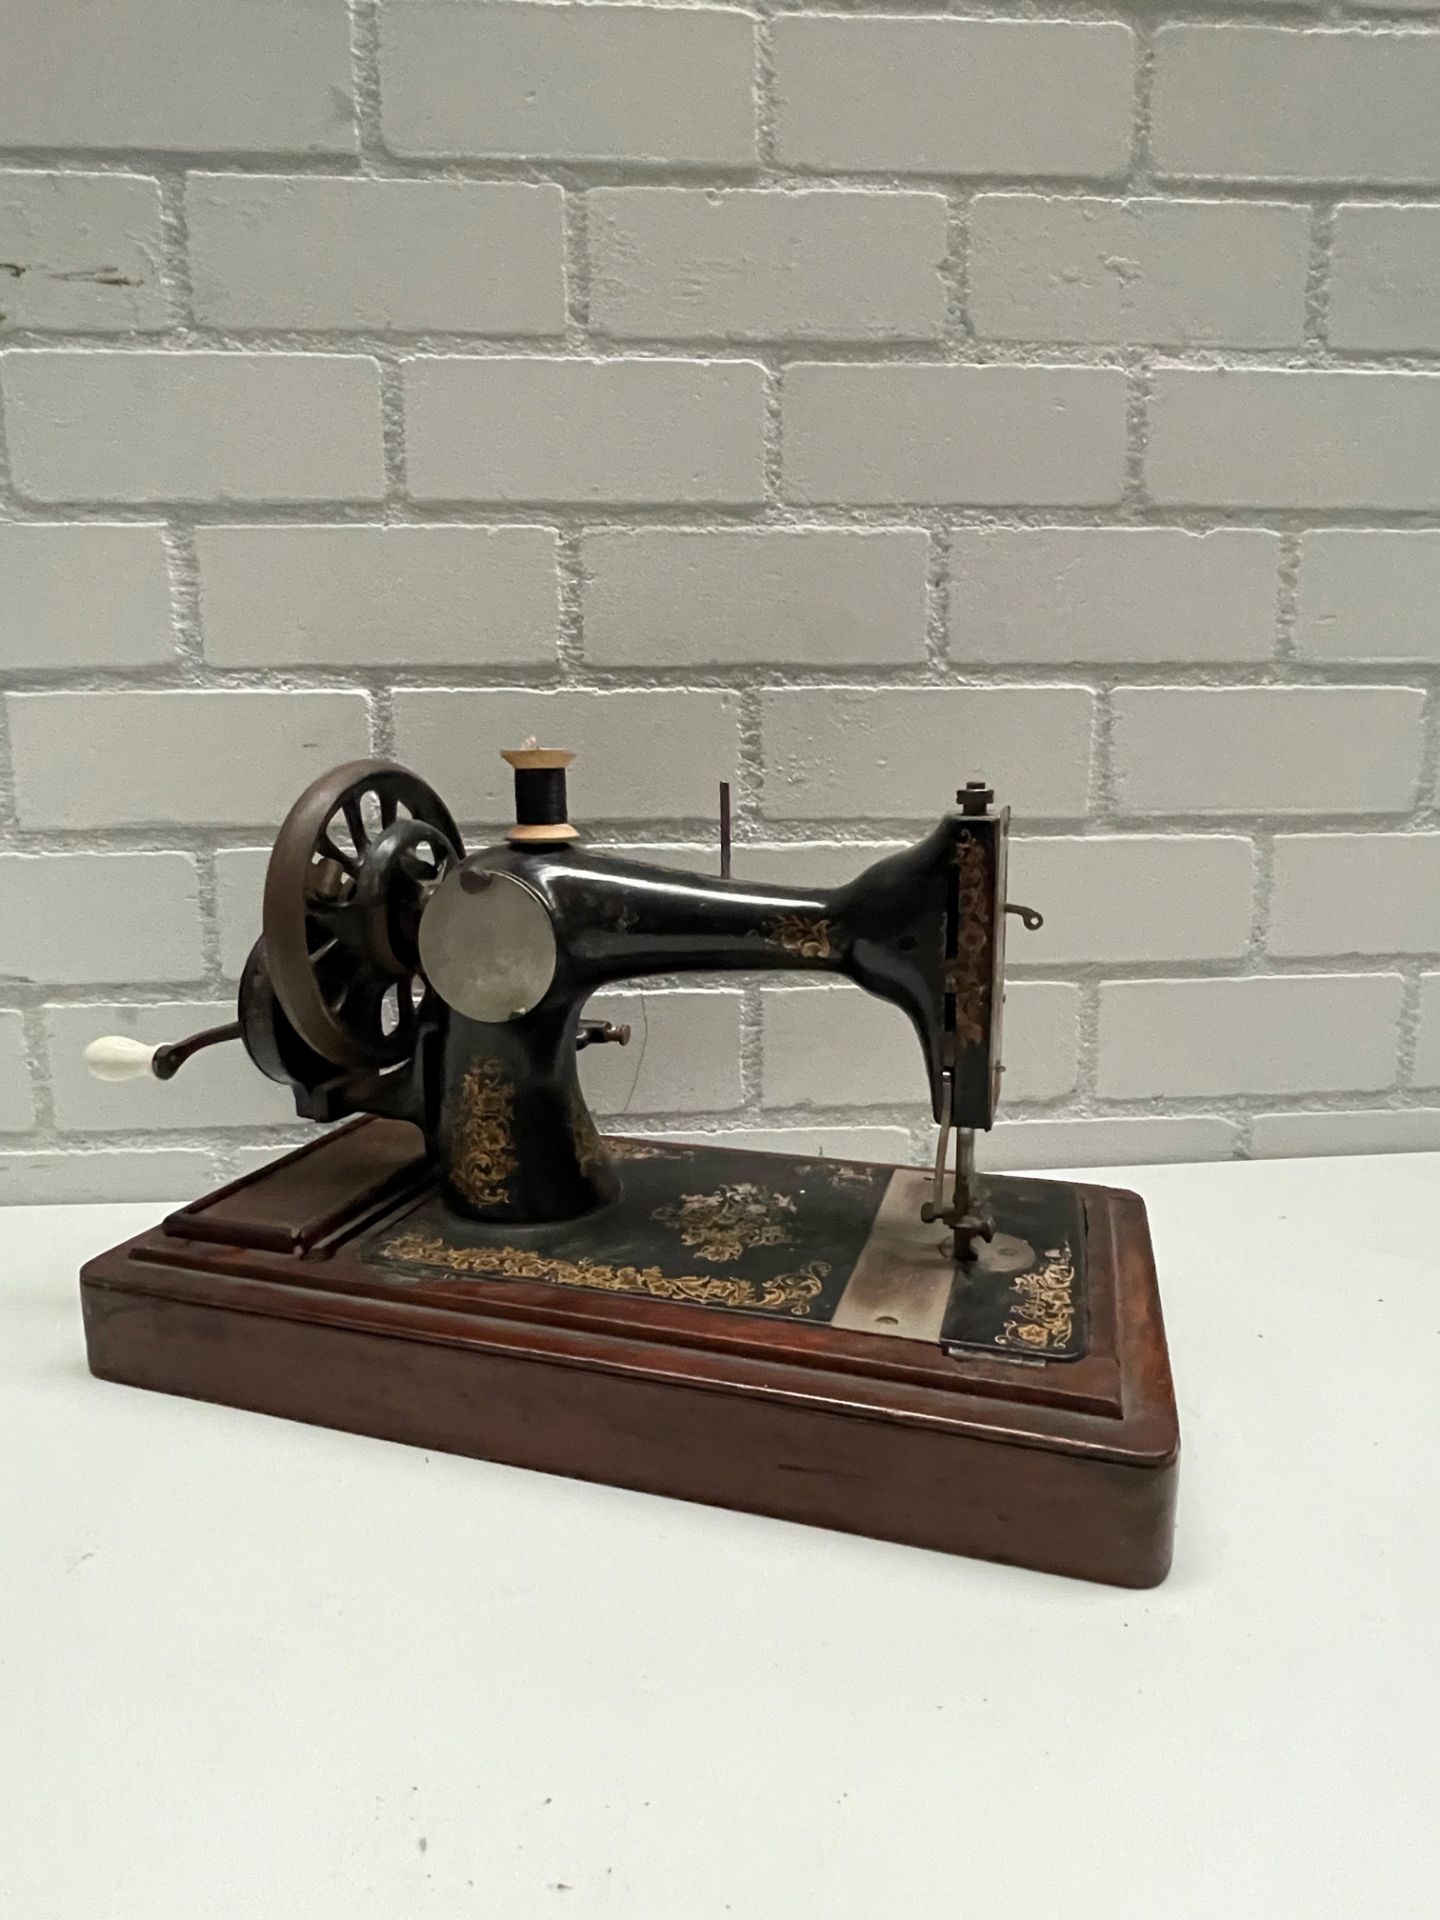 Vintage Cast Iron Sewing Machine - Image 4 of 11